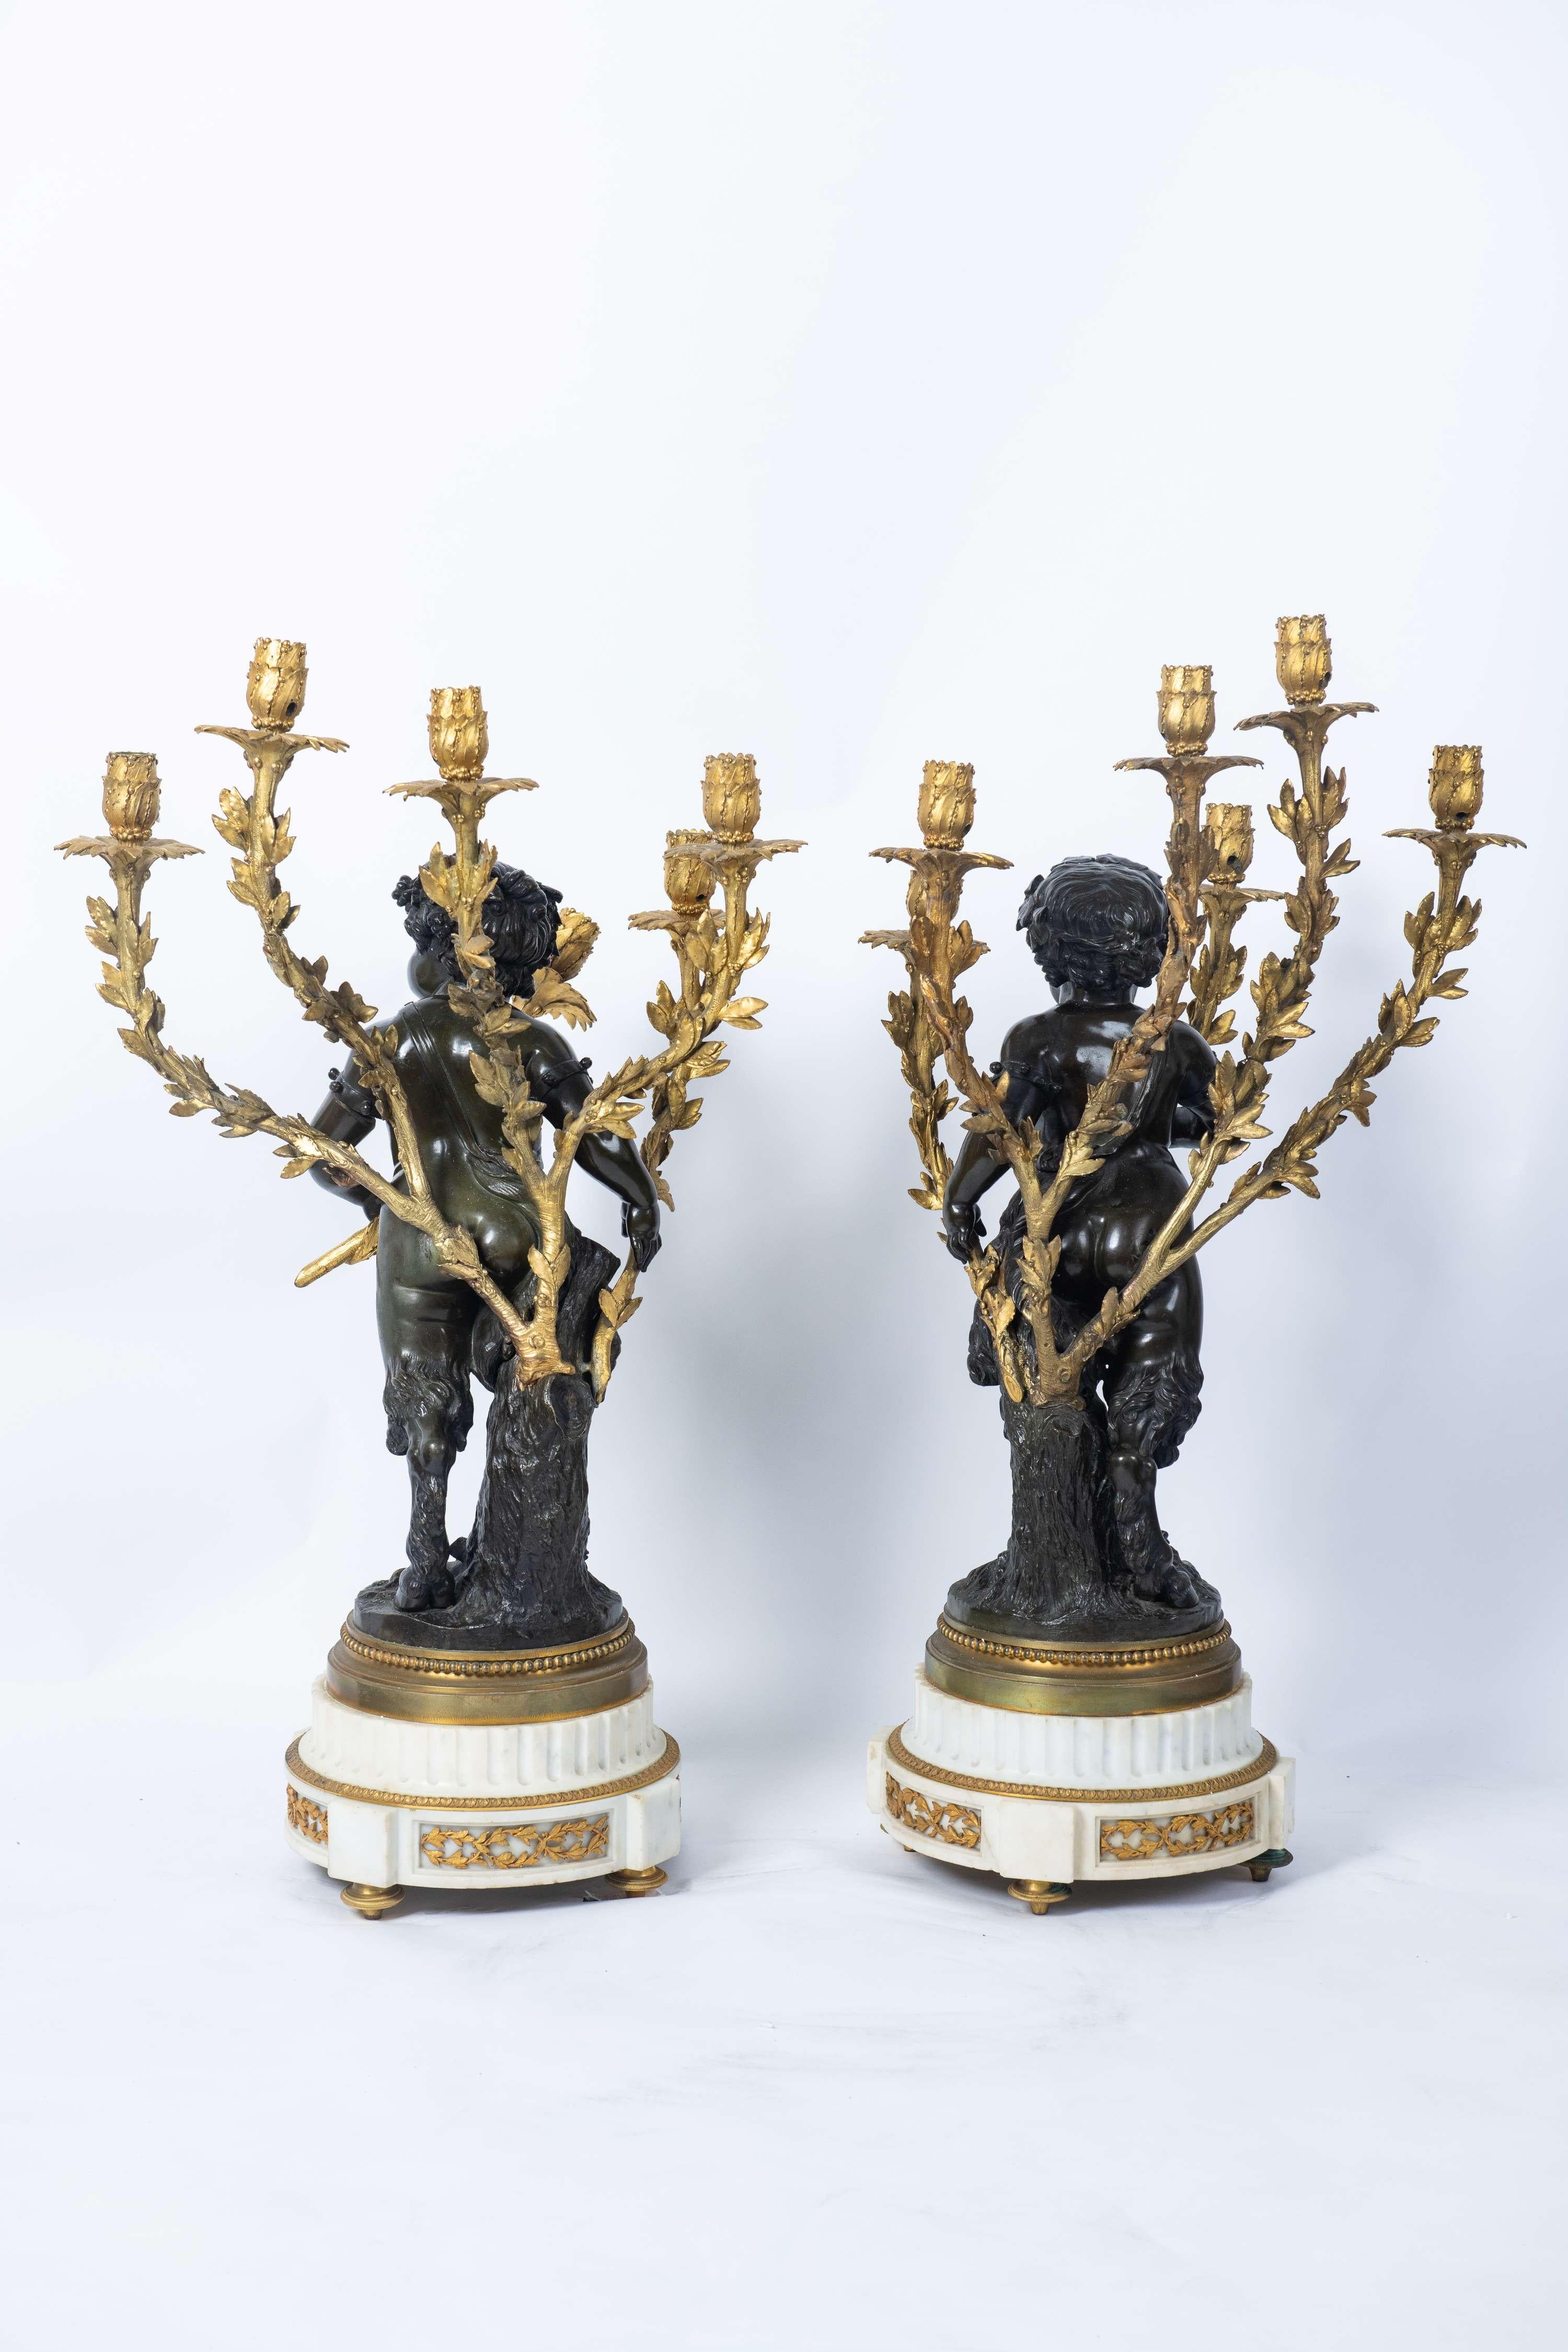 Pair of ormolu and patinated bronze twelve lights candelabra
The figure after the model by Claude Michel dit Clodion et Louis-Felix De La Rue
French circa 1820
H: 80 cm

Provenance: French private collection
The figures of these candelabra were